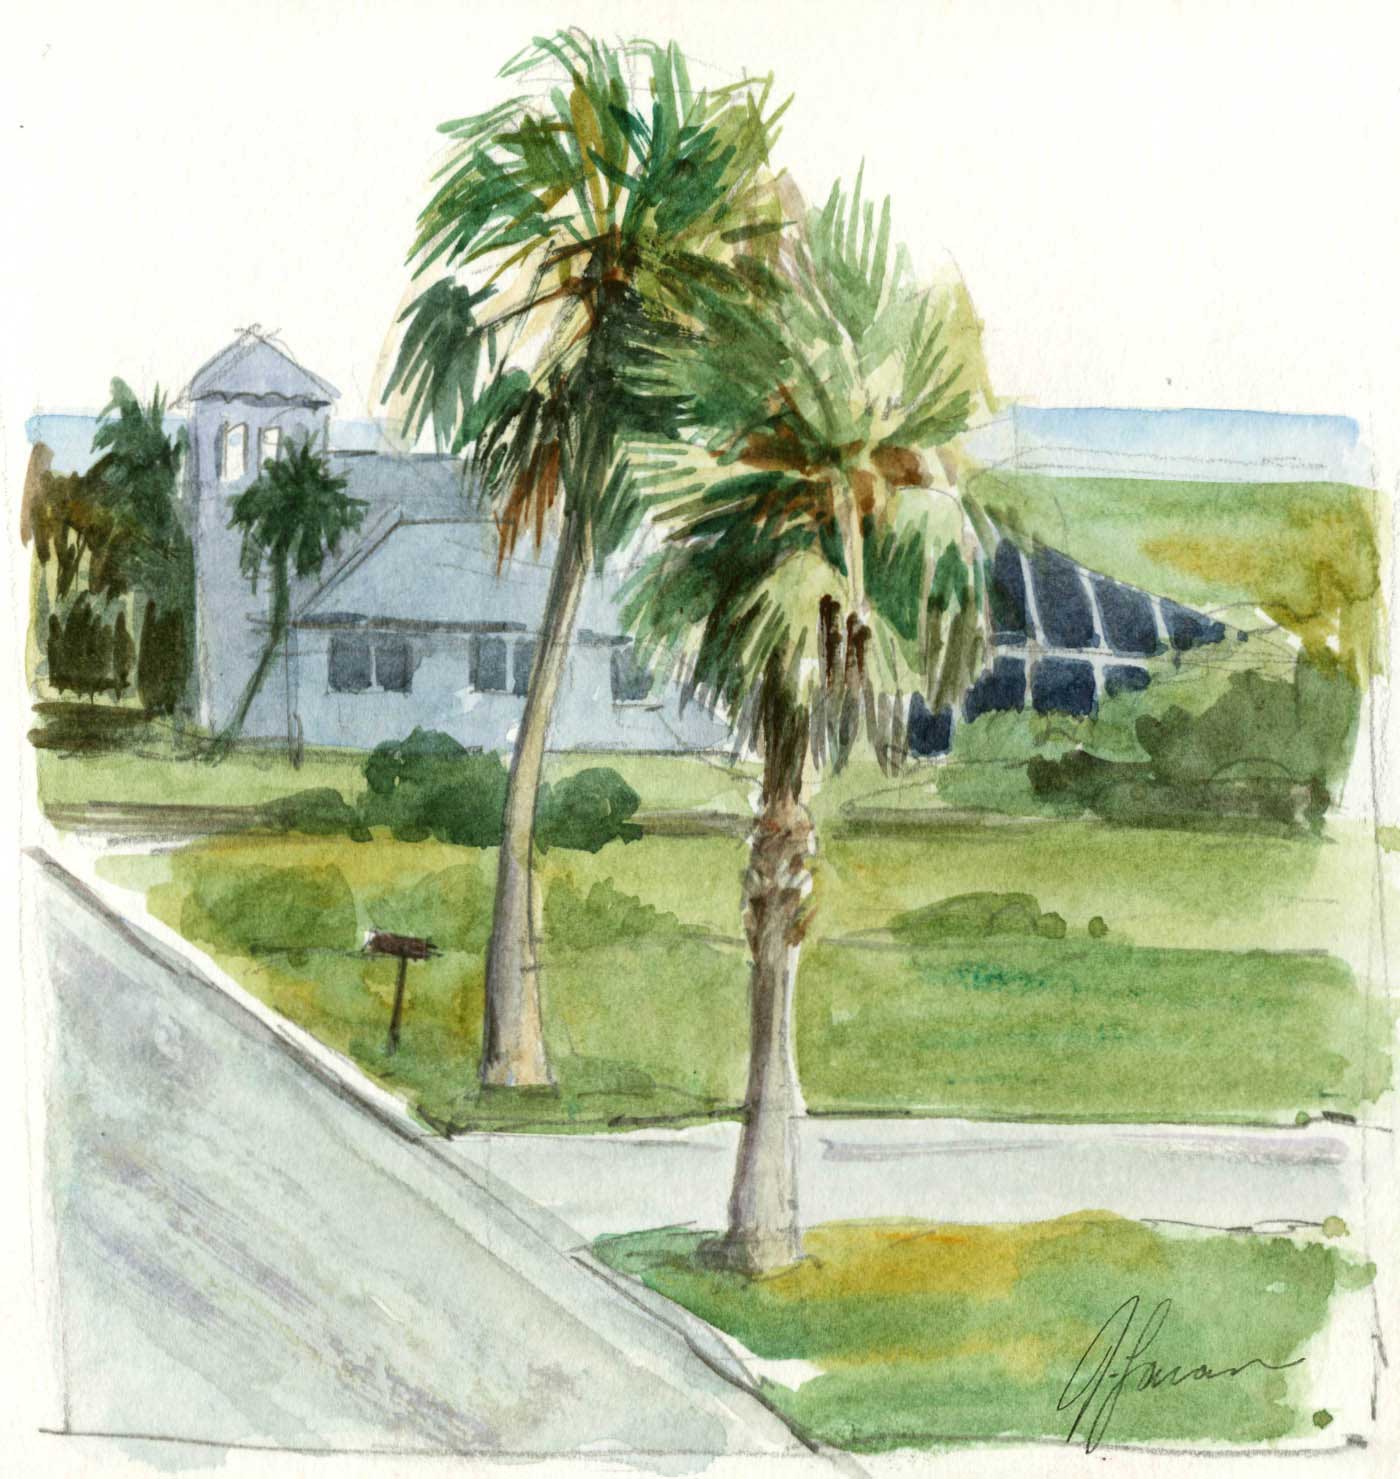 Watercolor sketch from high point of view showing two palm trees on either side of a suburban driveway with another house and the ocean behind.